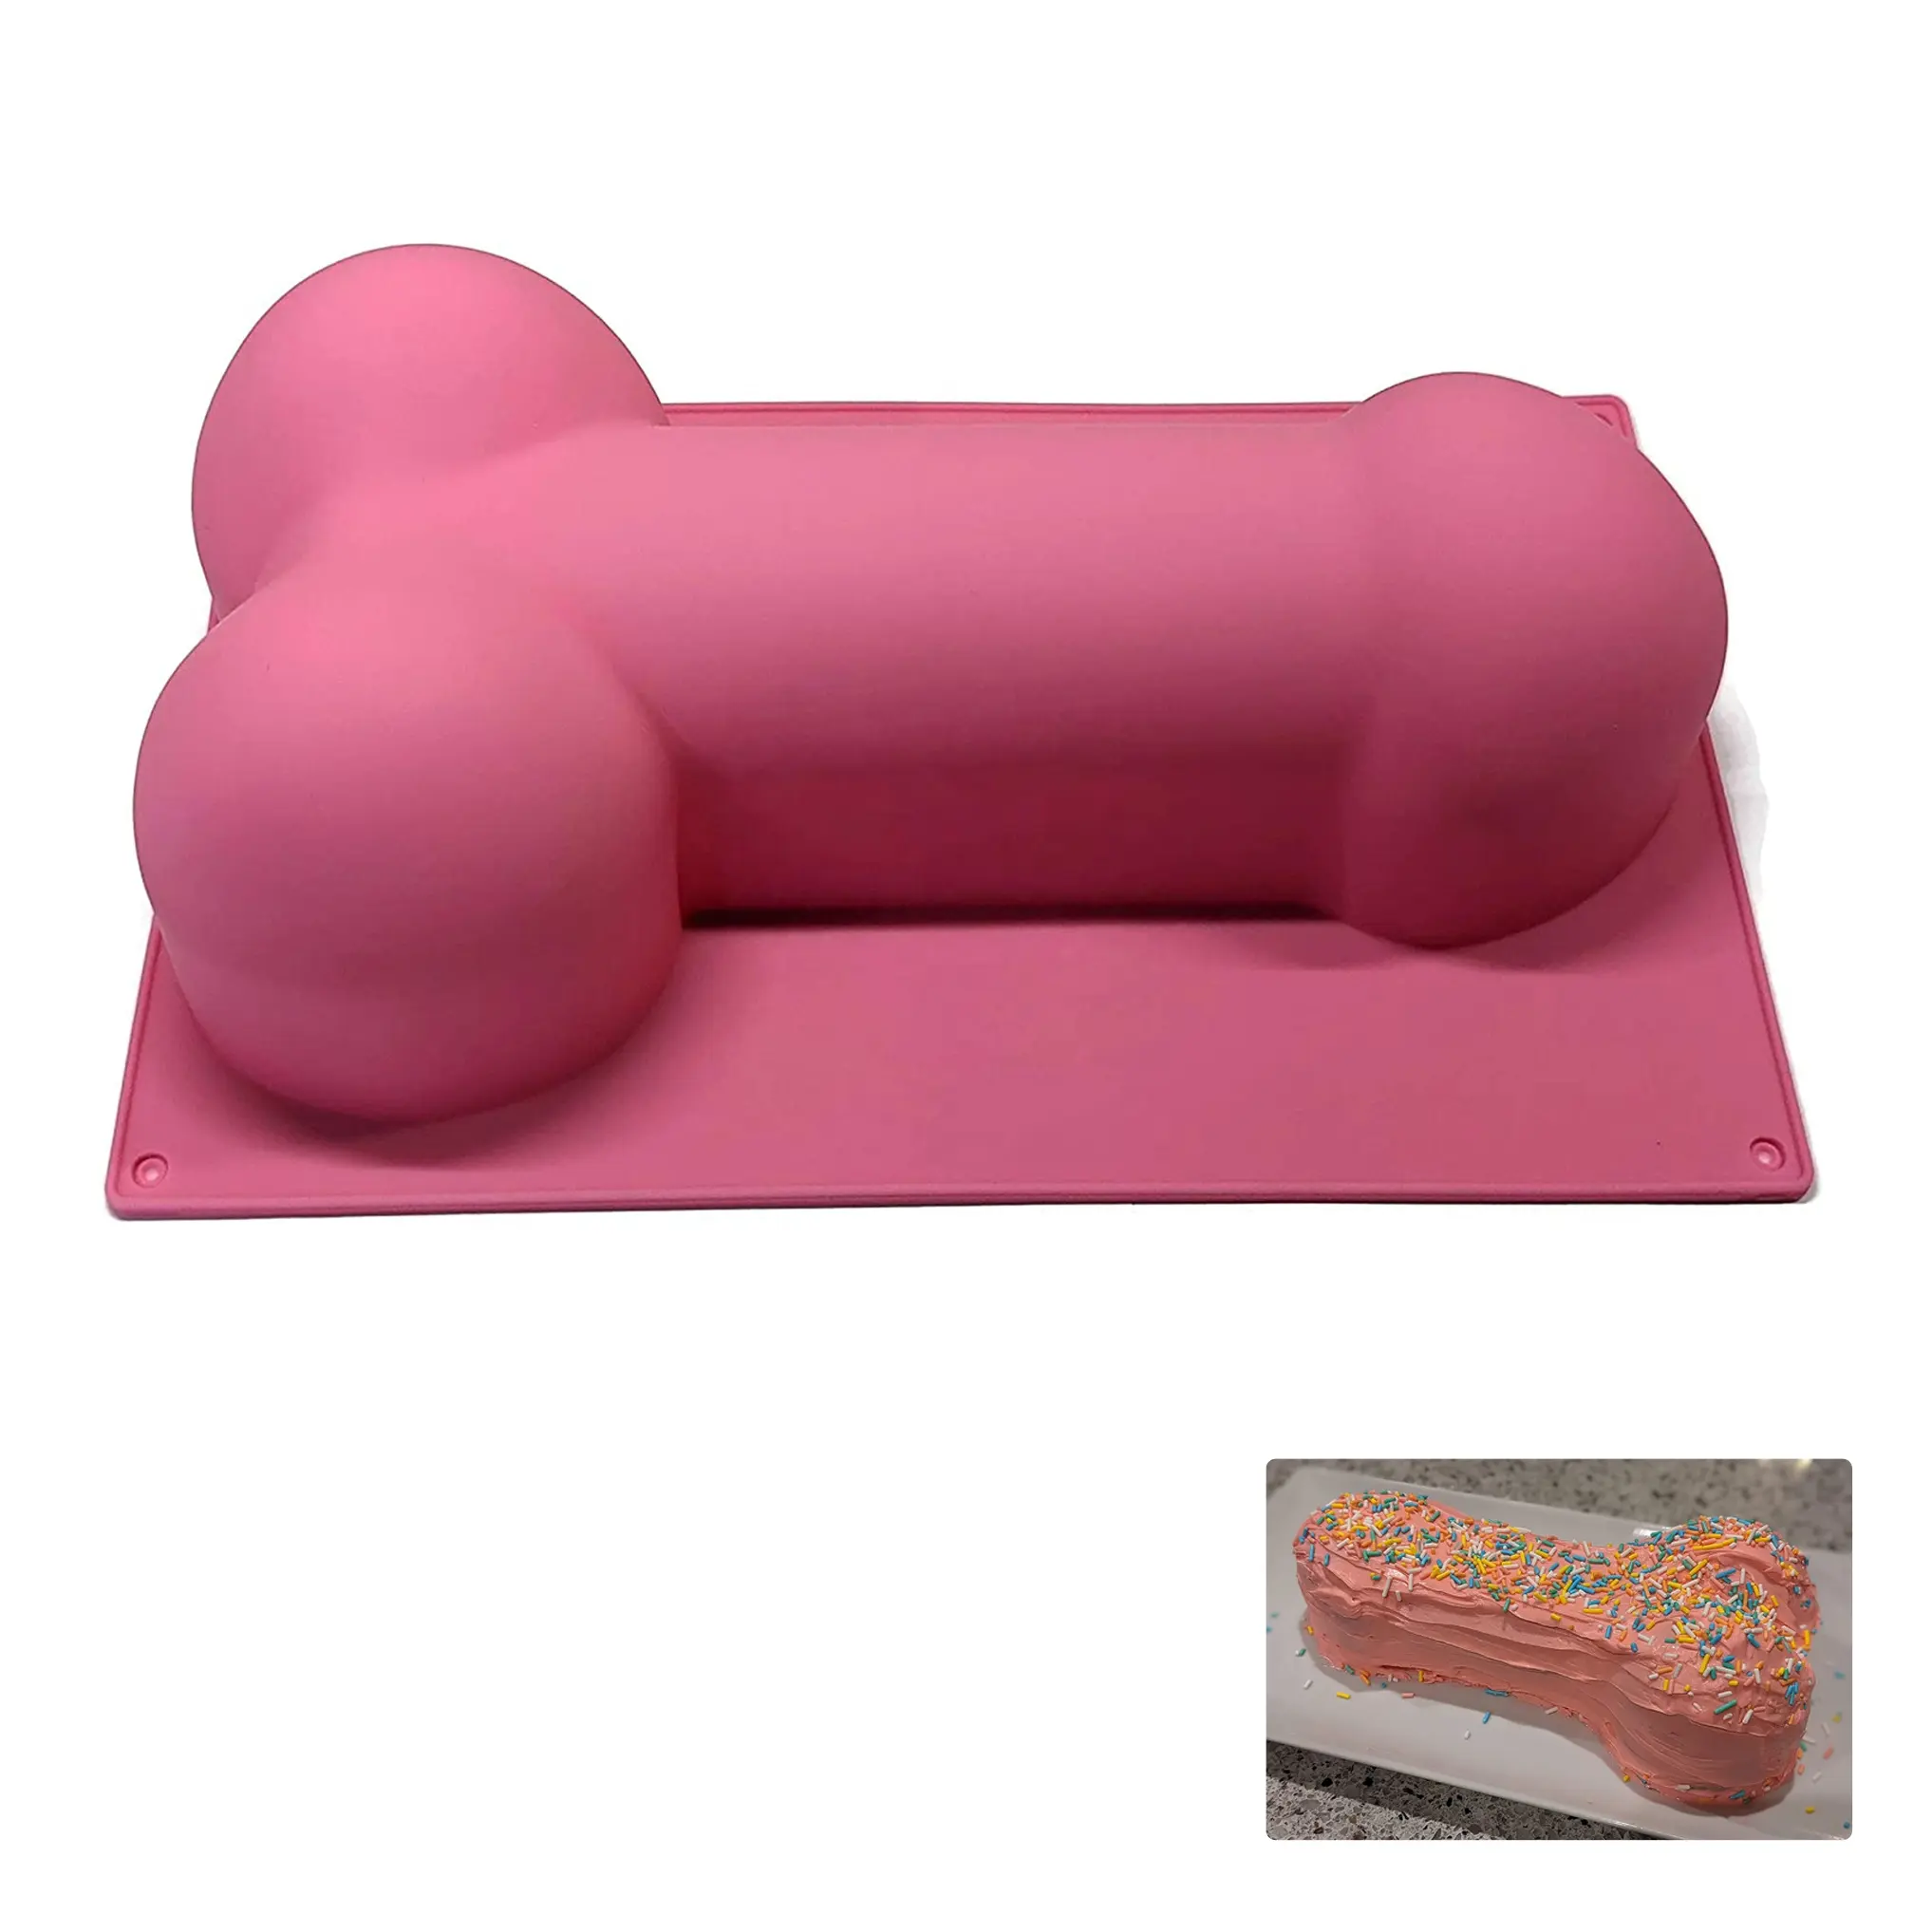 Food Grade Silicone Hooligan Penis Cake Candle Mold Silicone Funny Cake Baking Molds for Birthday Party